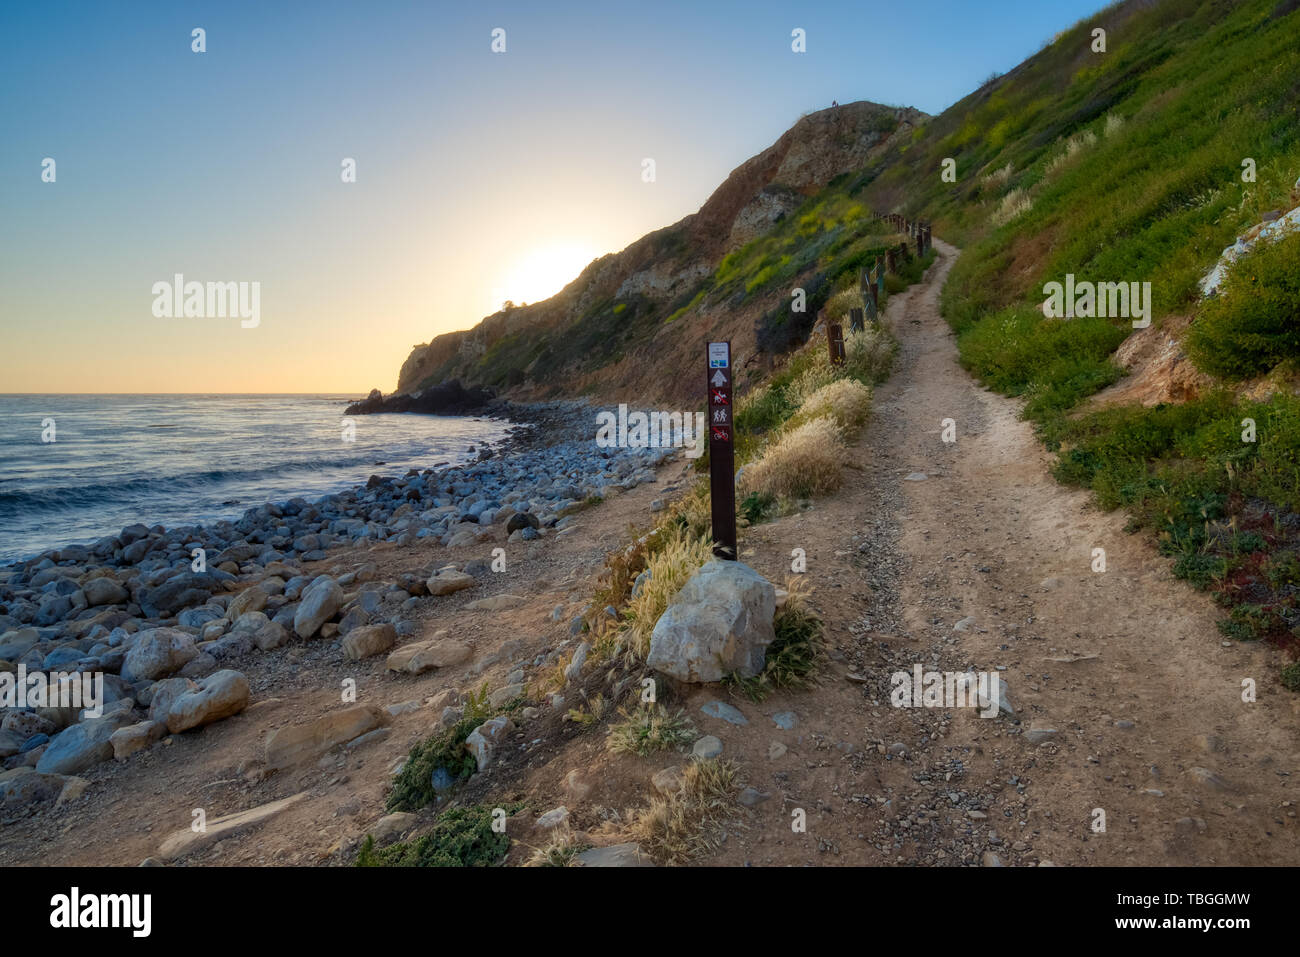 Coastal view of tall cliffs of Pelican Cove and Tovemore Trail at sunset, Rancho Palos Verdes, California Stock Photo